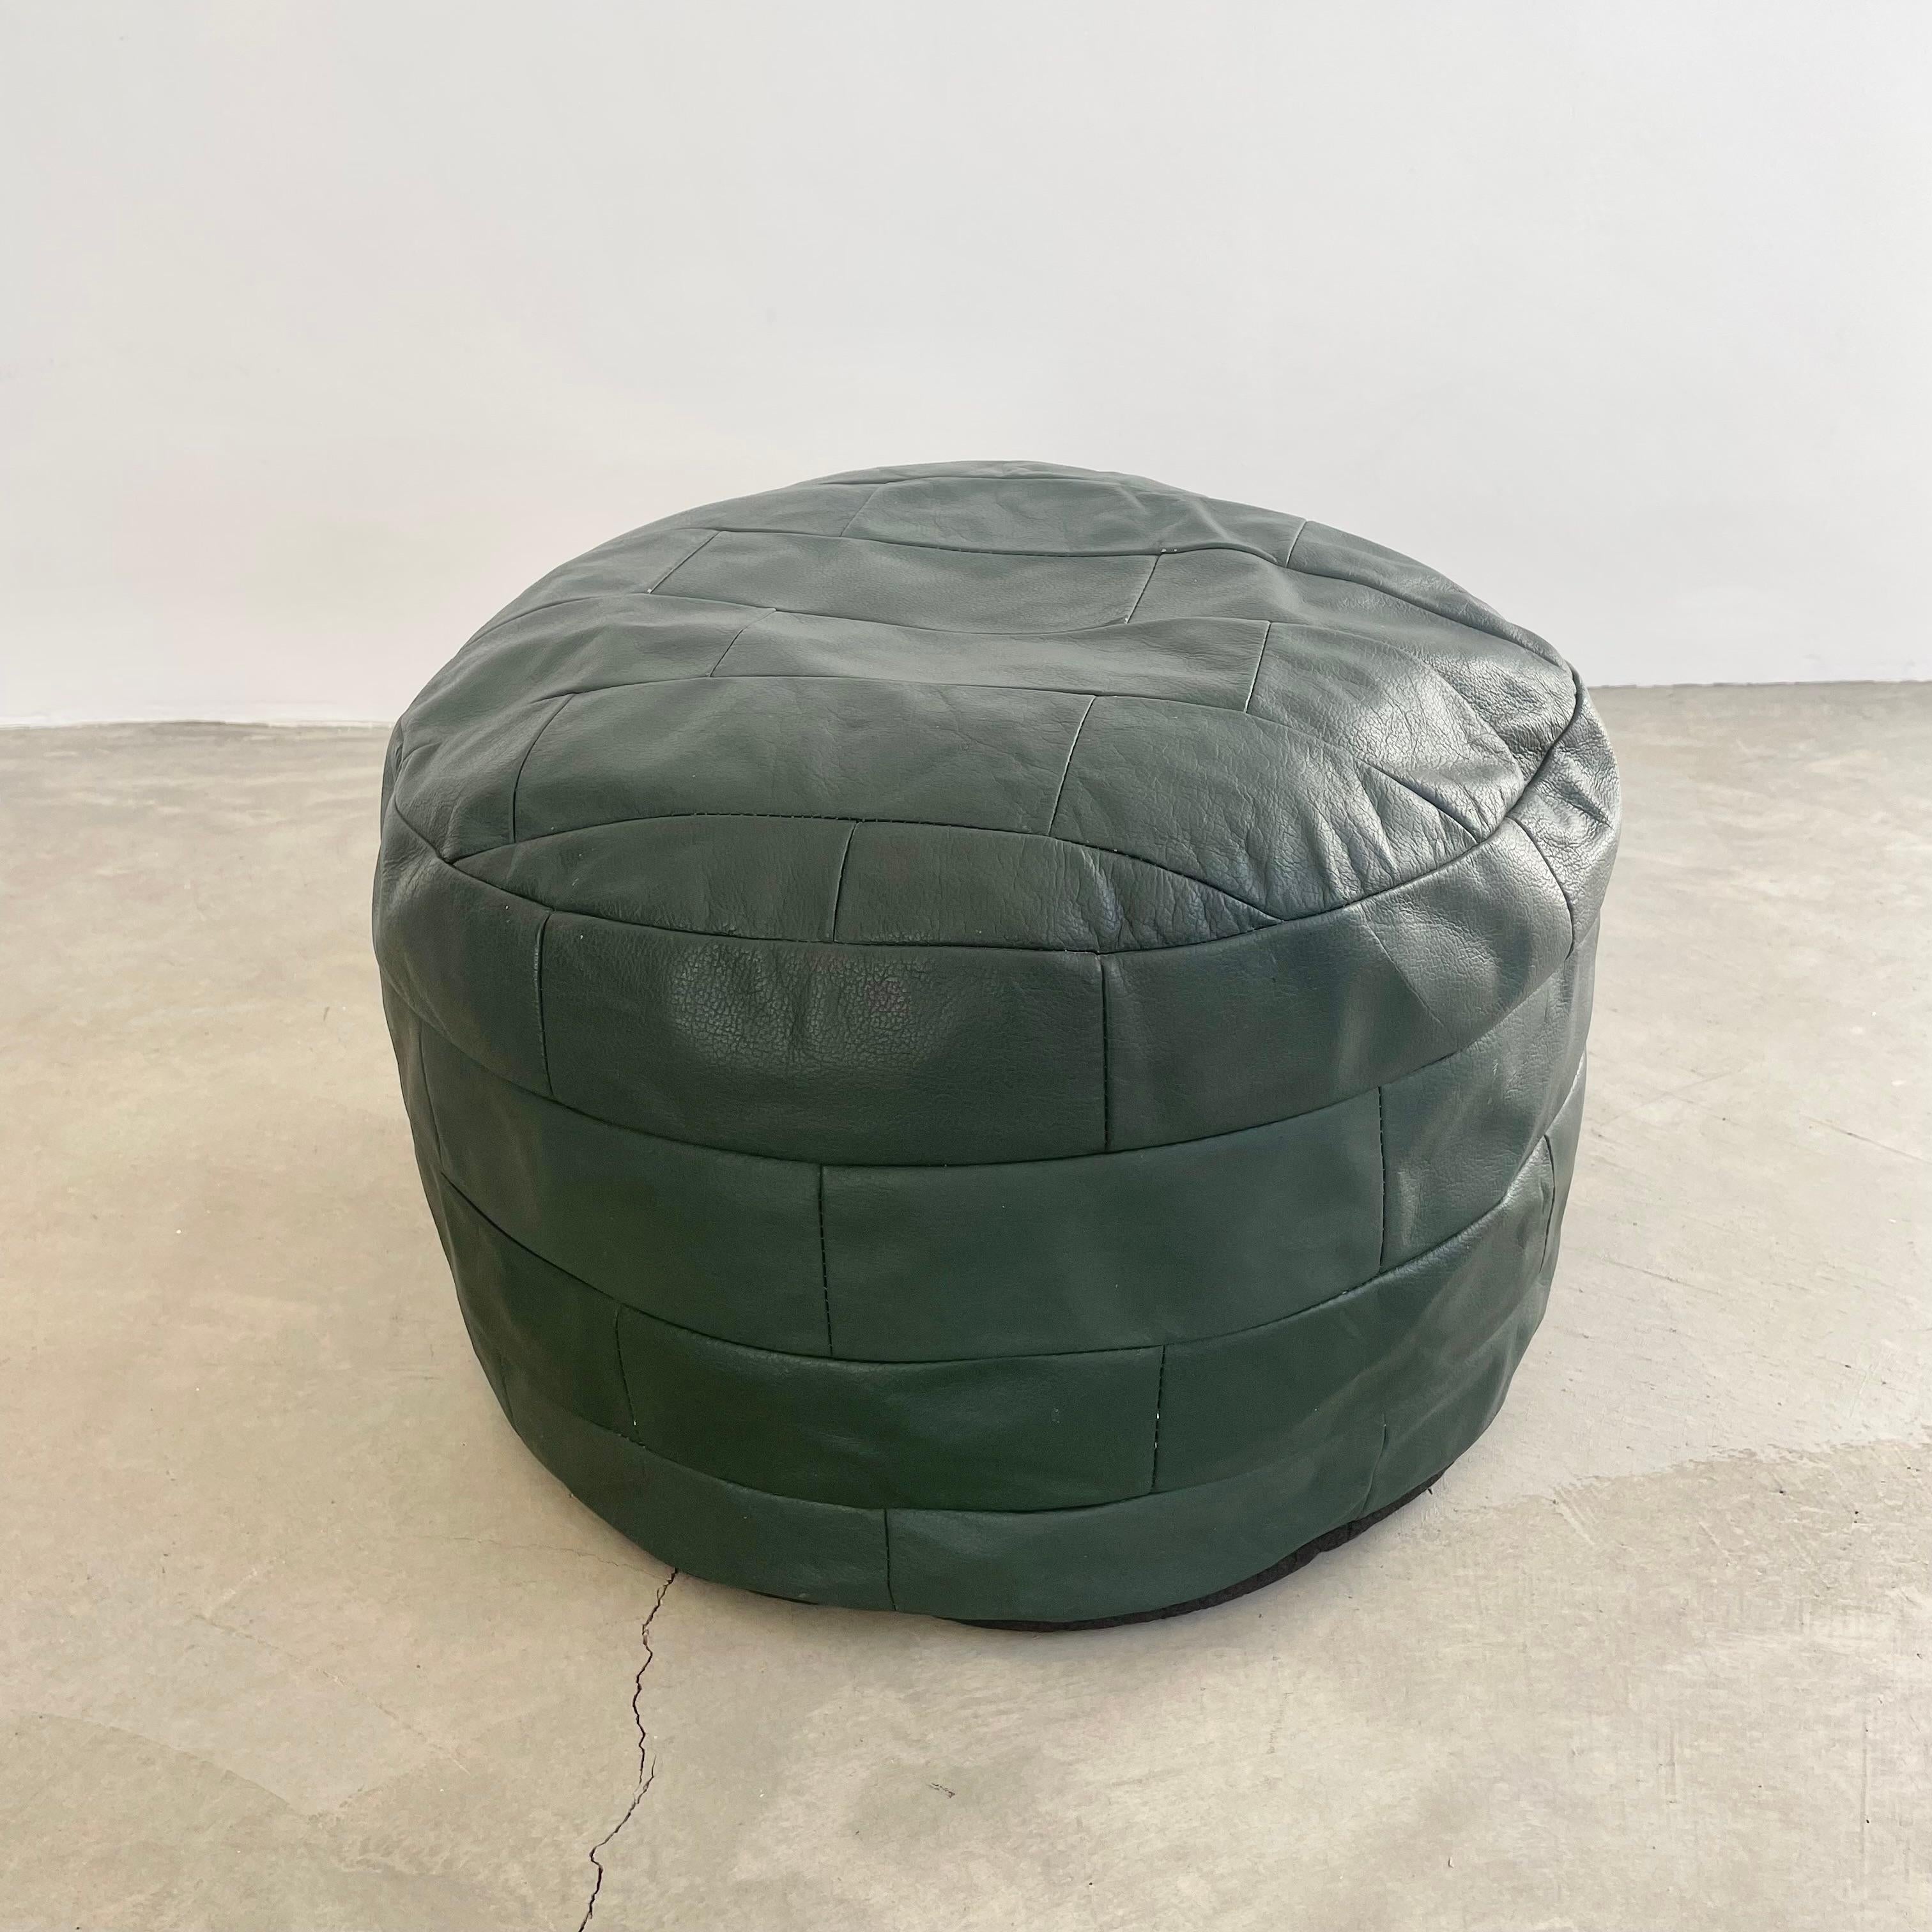 Gorgeous viridian green leather pouf/ottoman by Swiss designer De Sede with square patchwork. Handmade with wonderful faded patina. Gorgeous accent piece. Good vintage condition. Wear appropriate with age. Brand new filler. Perfect living room